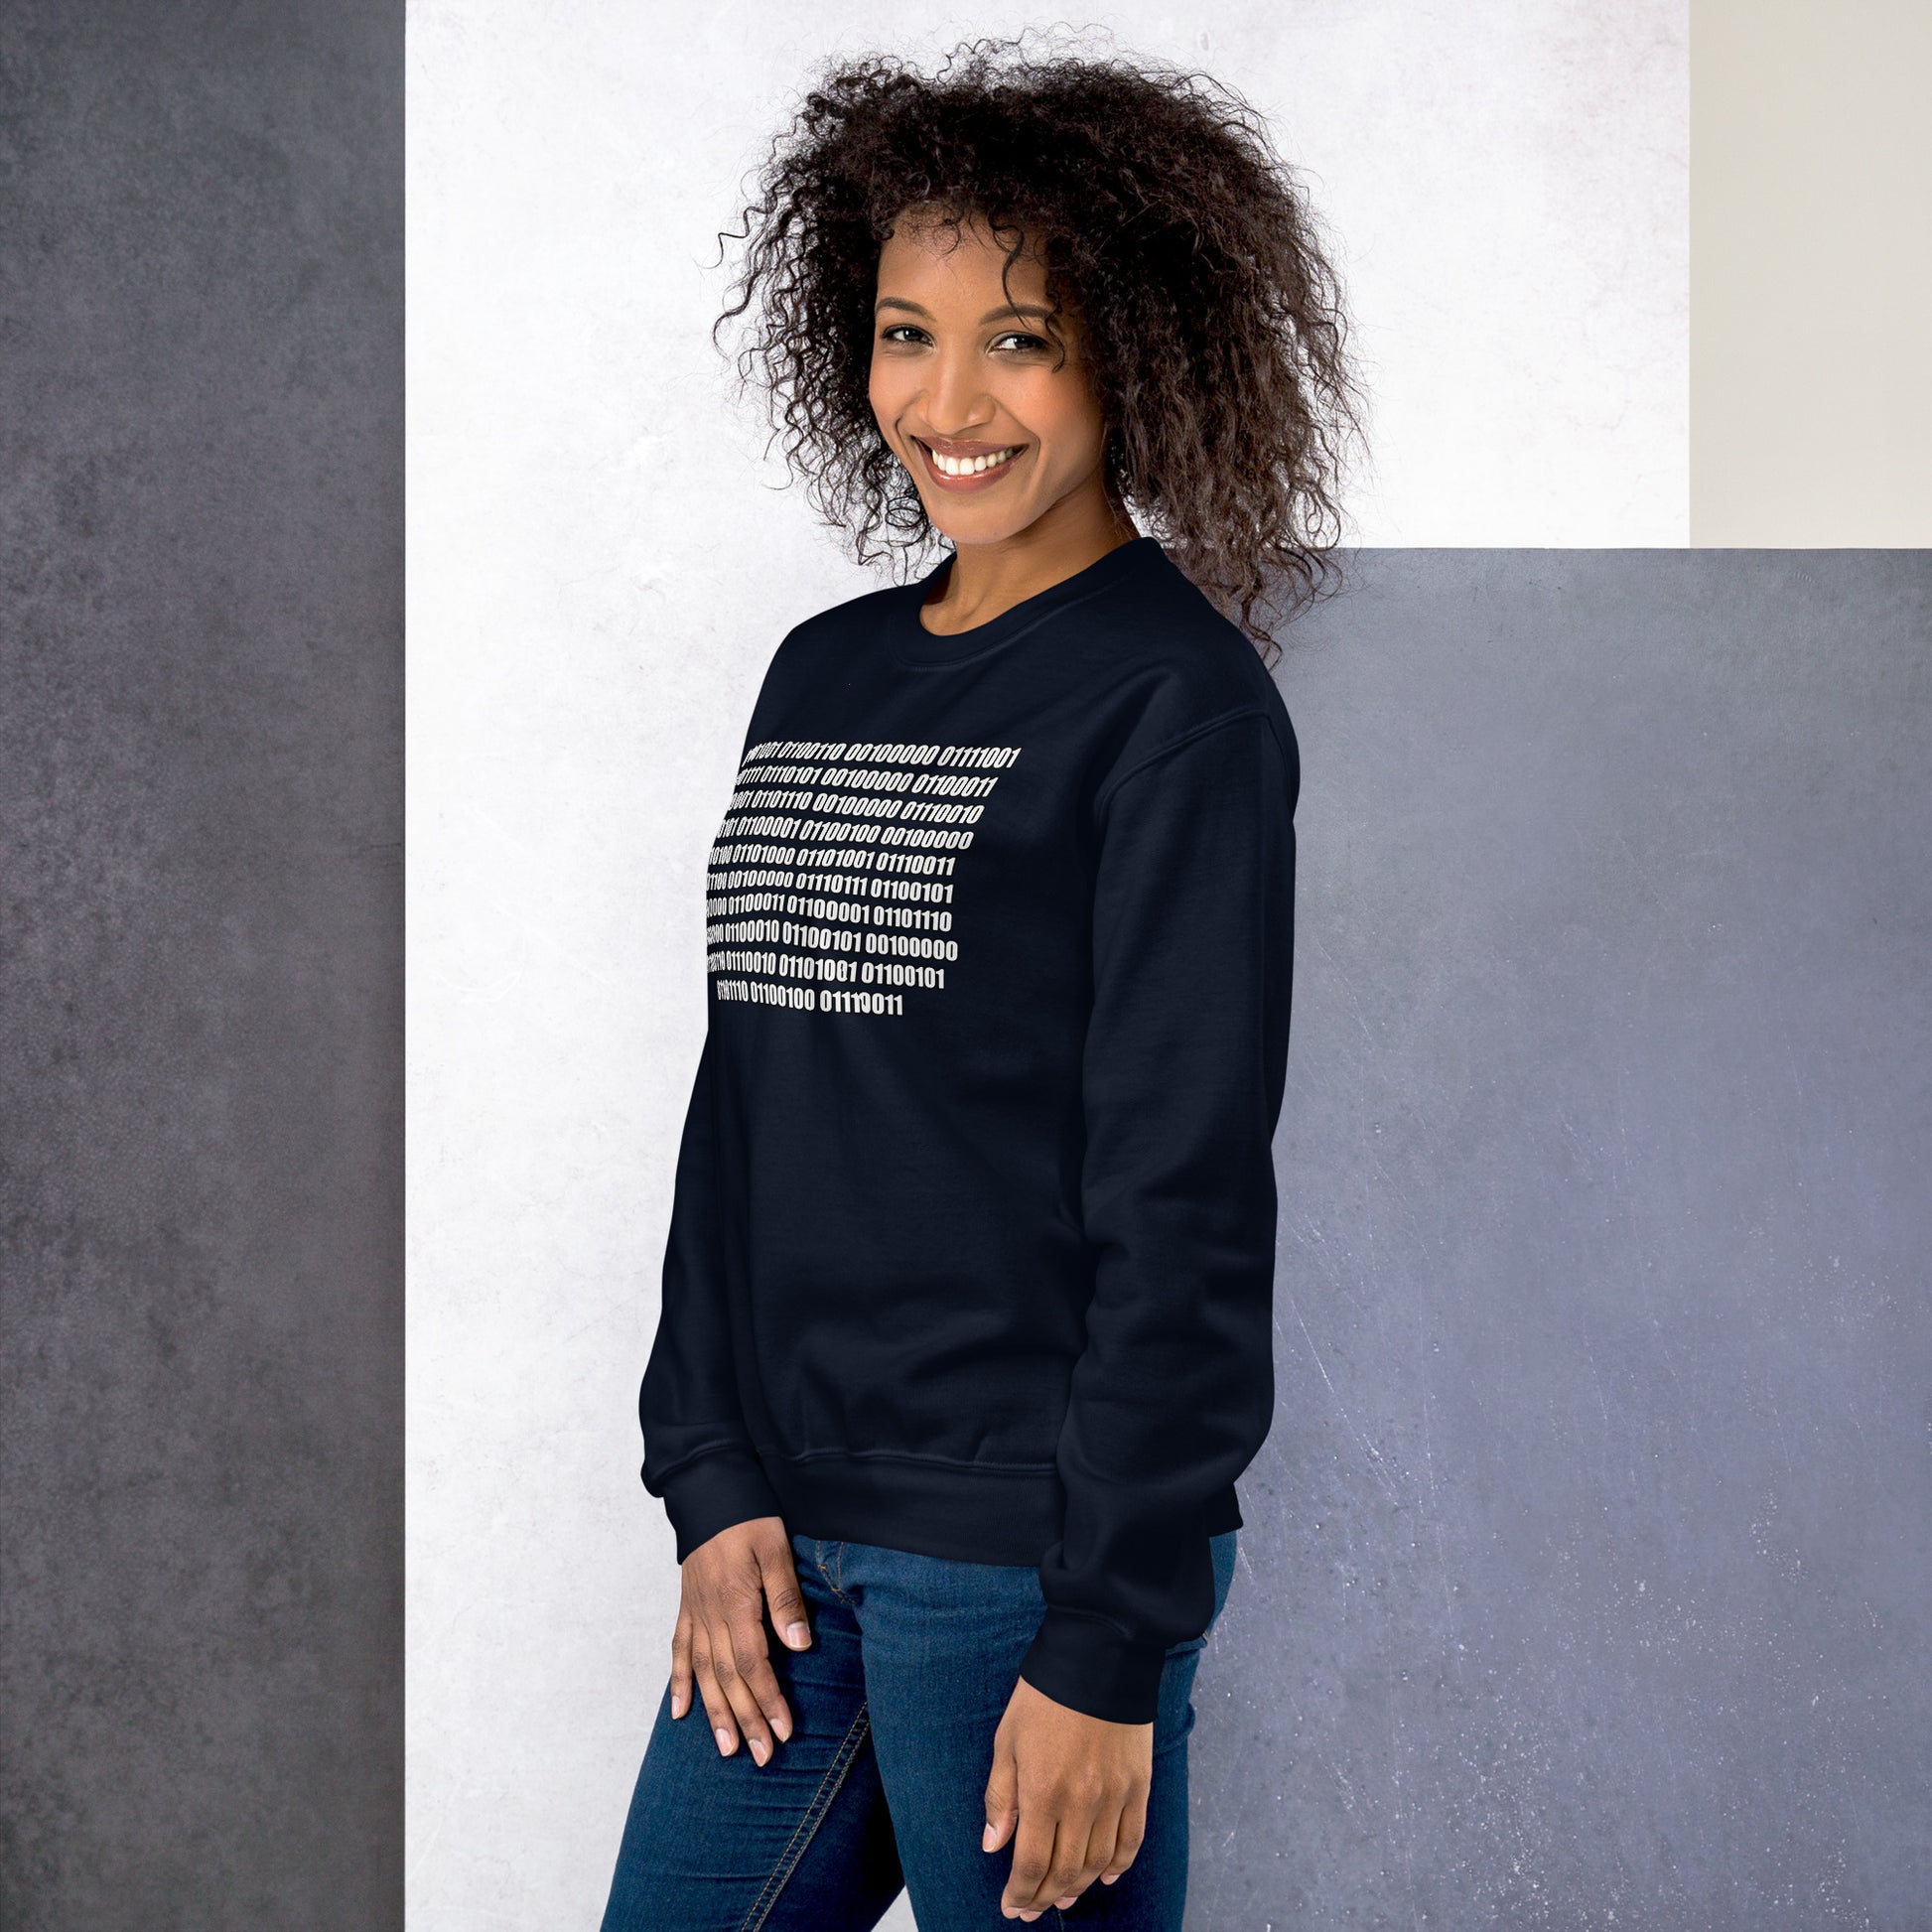 Women with navy sweatshirt with binaire text "If you can read this"